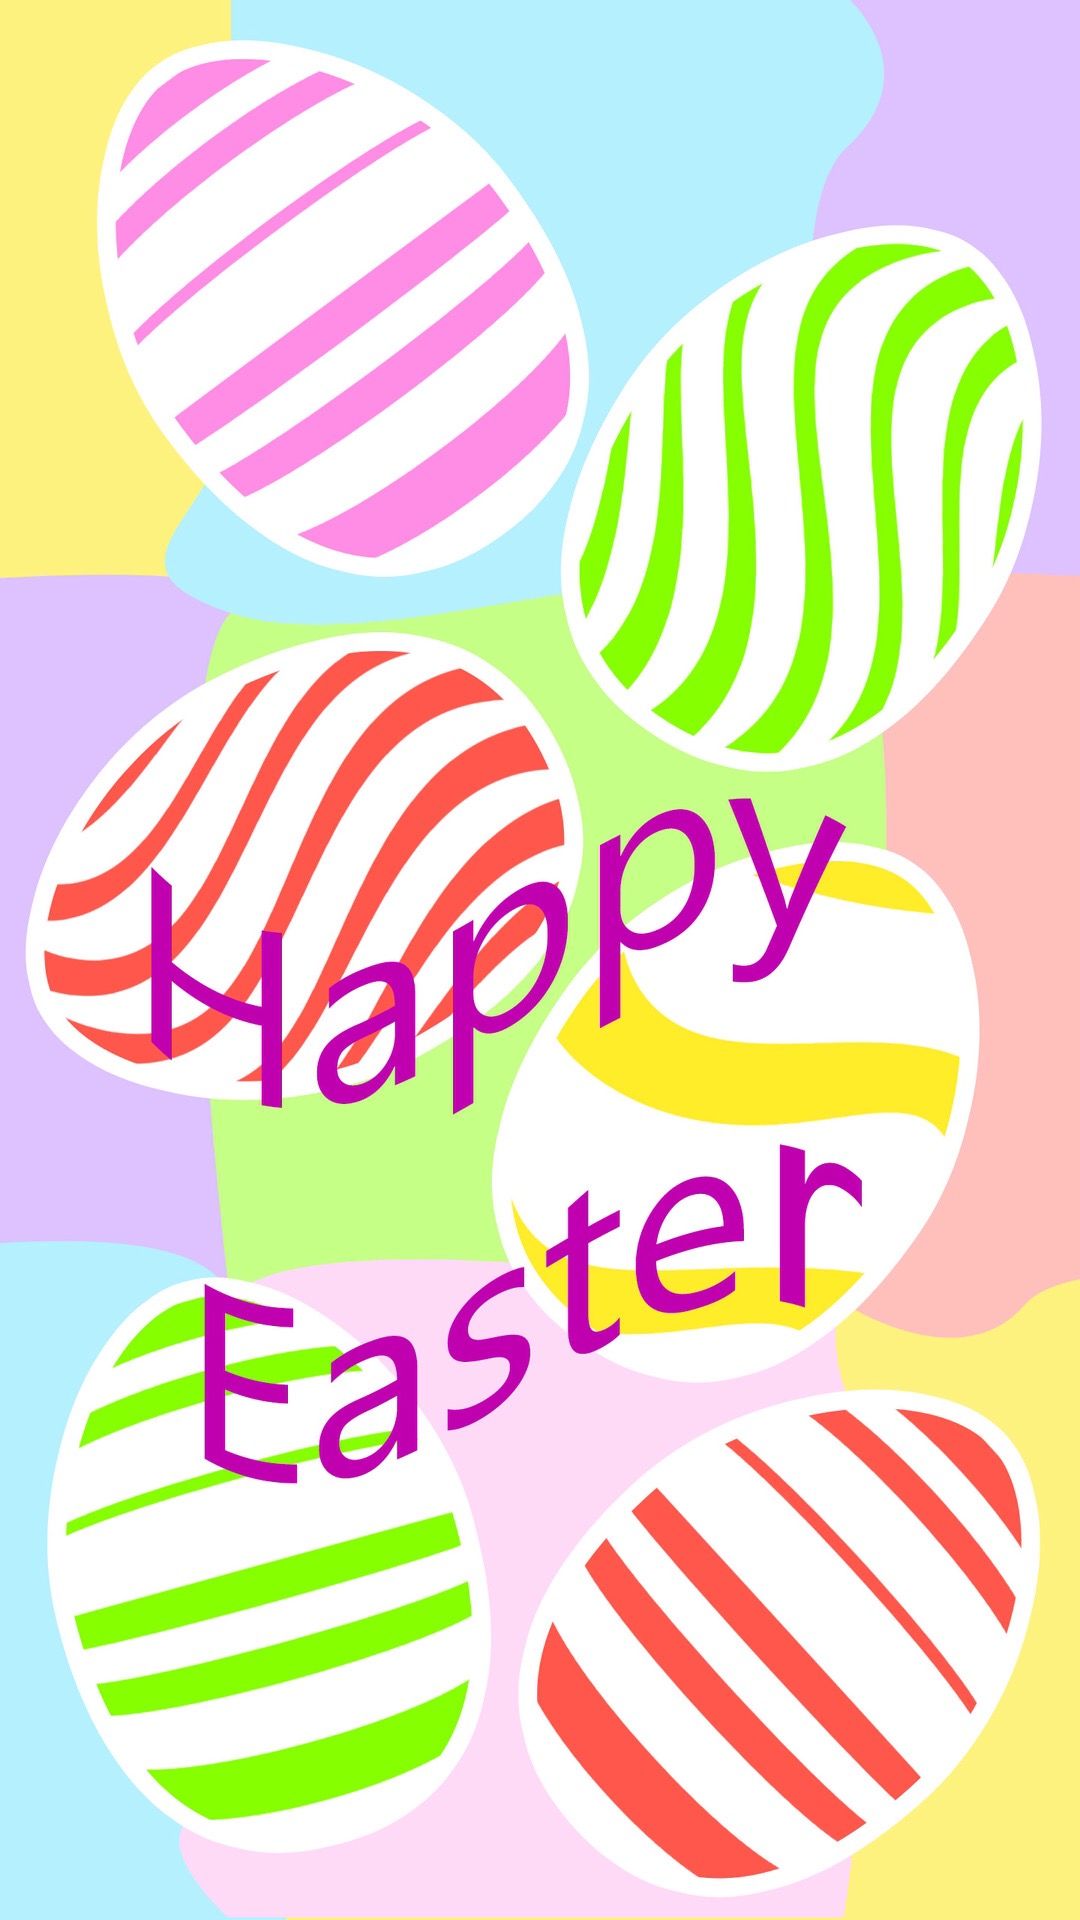 Wallpaper♥. Easter wallpaper, Happy easter wallpaper, Happy easter